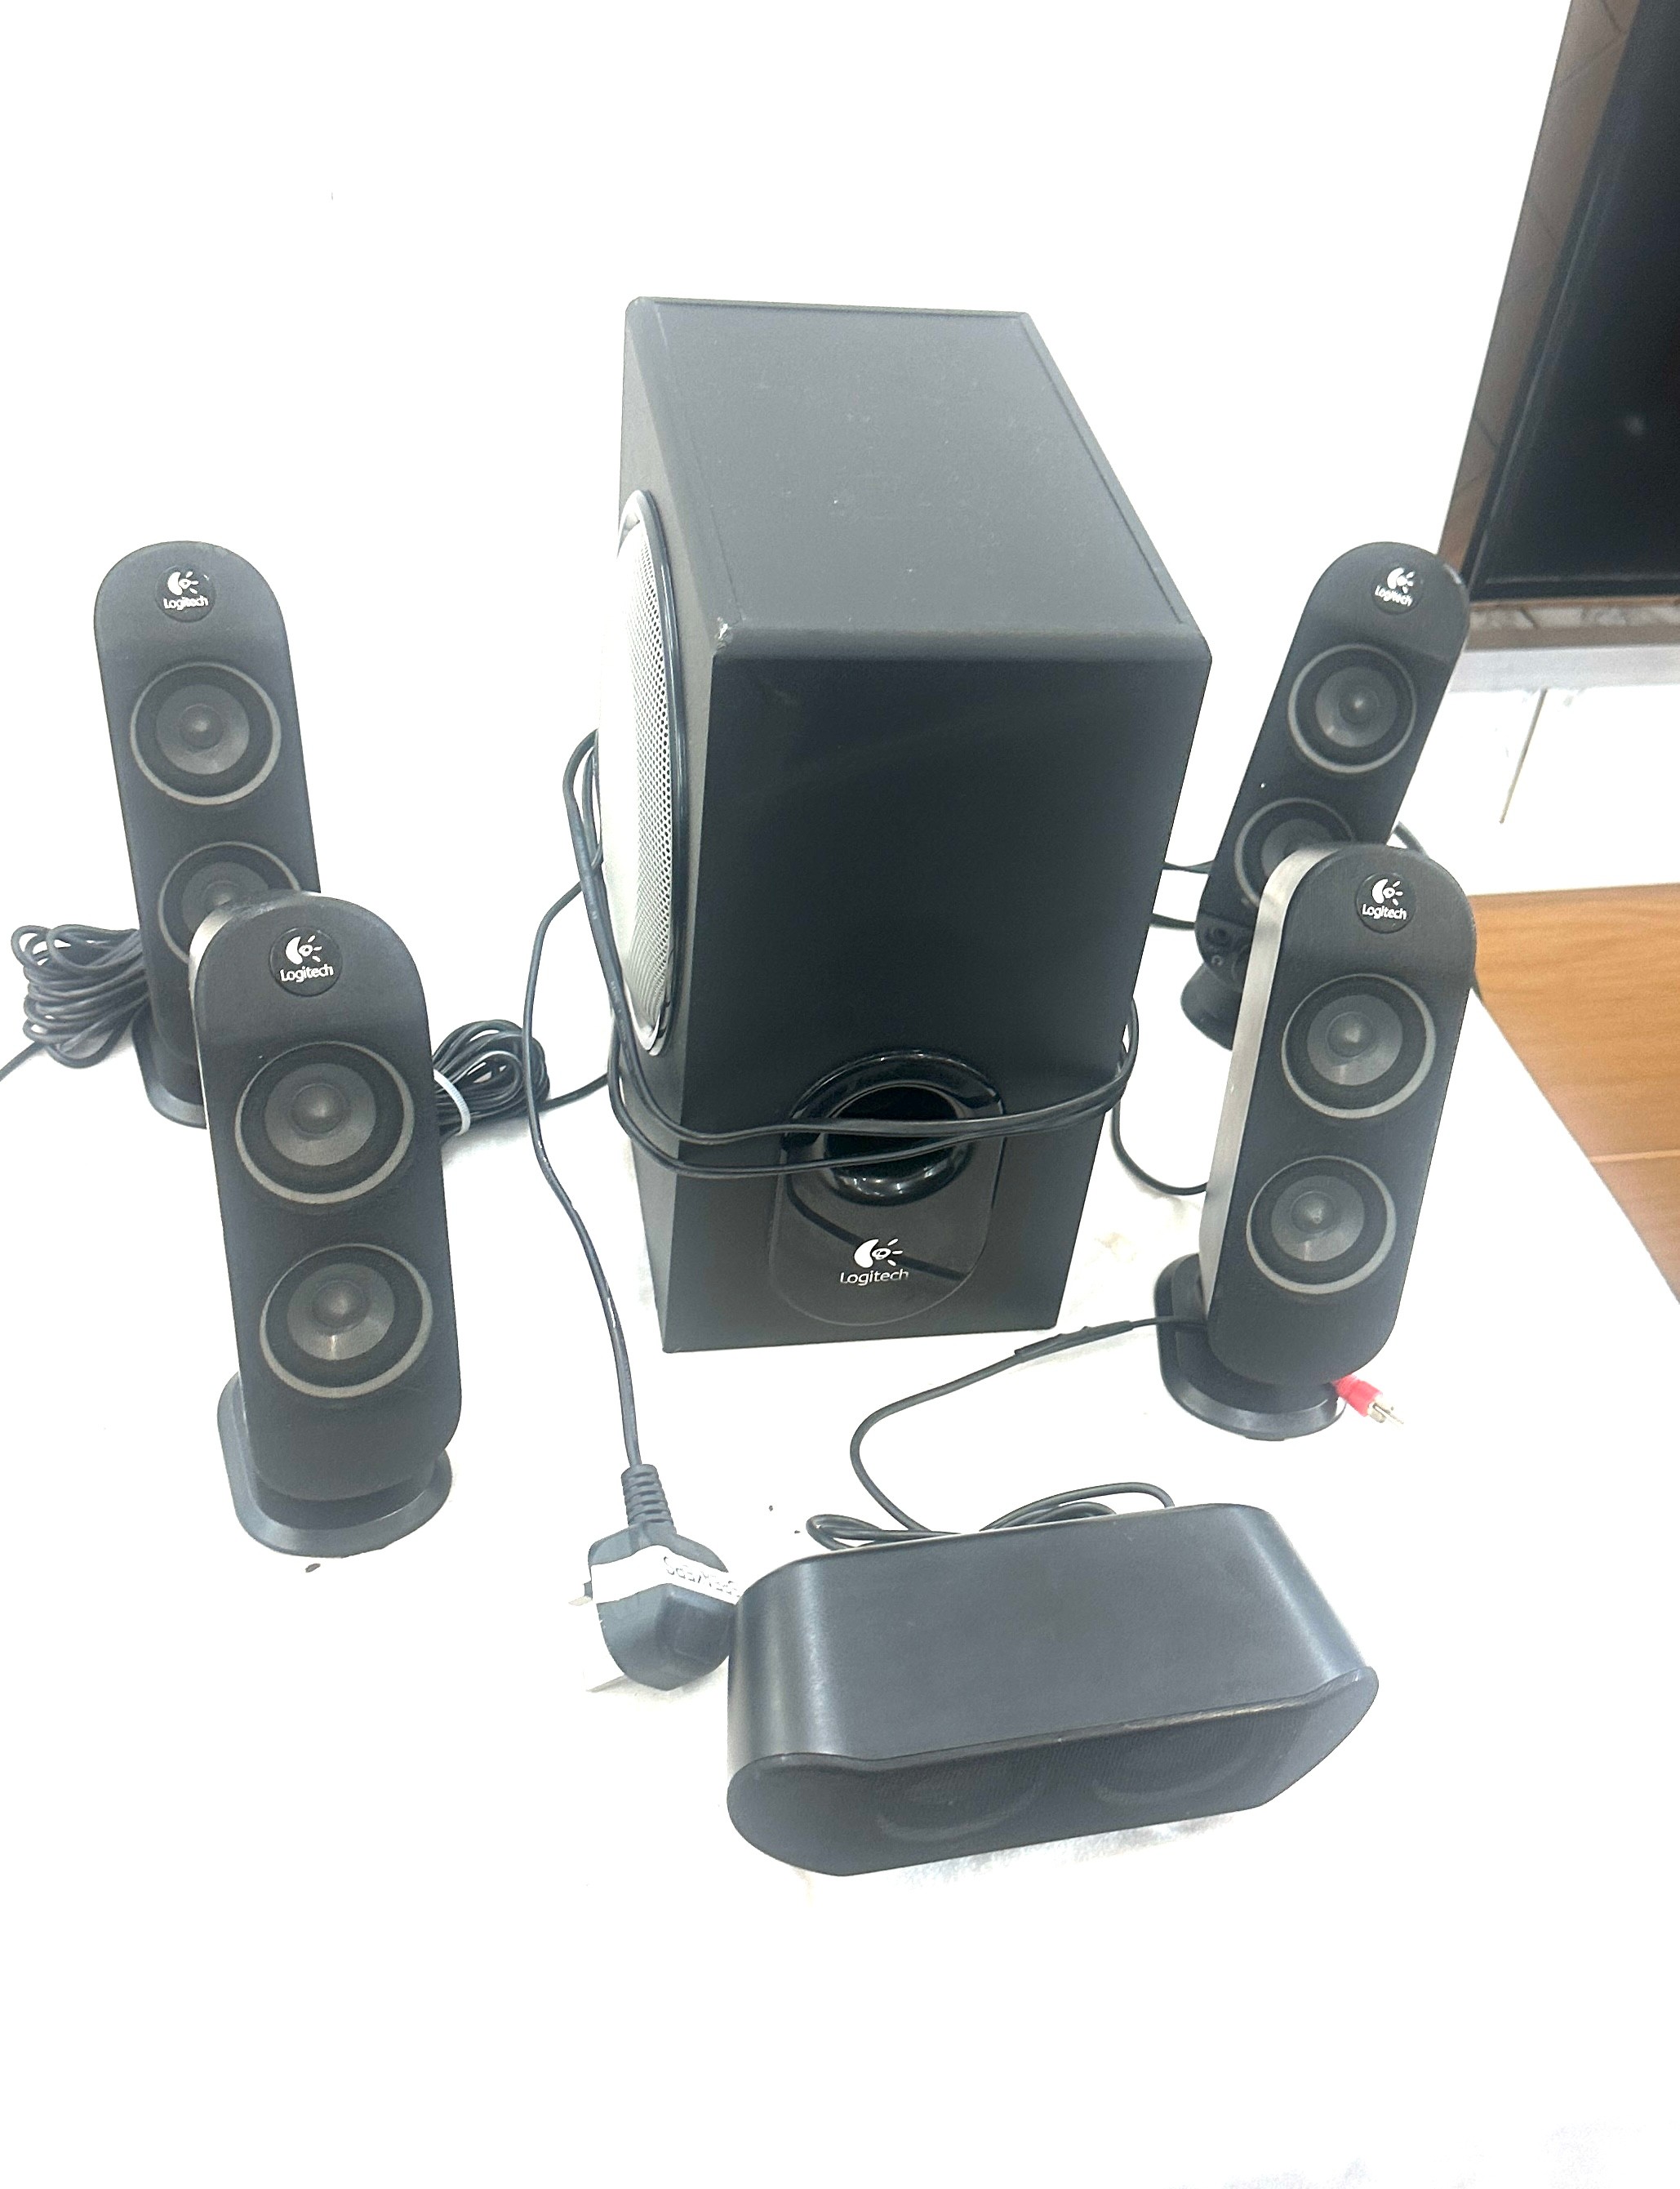 Logitech X-530 Computer Speakers- untested